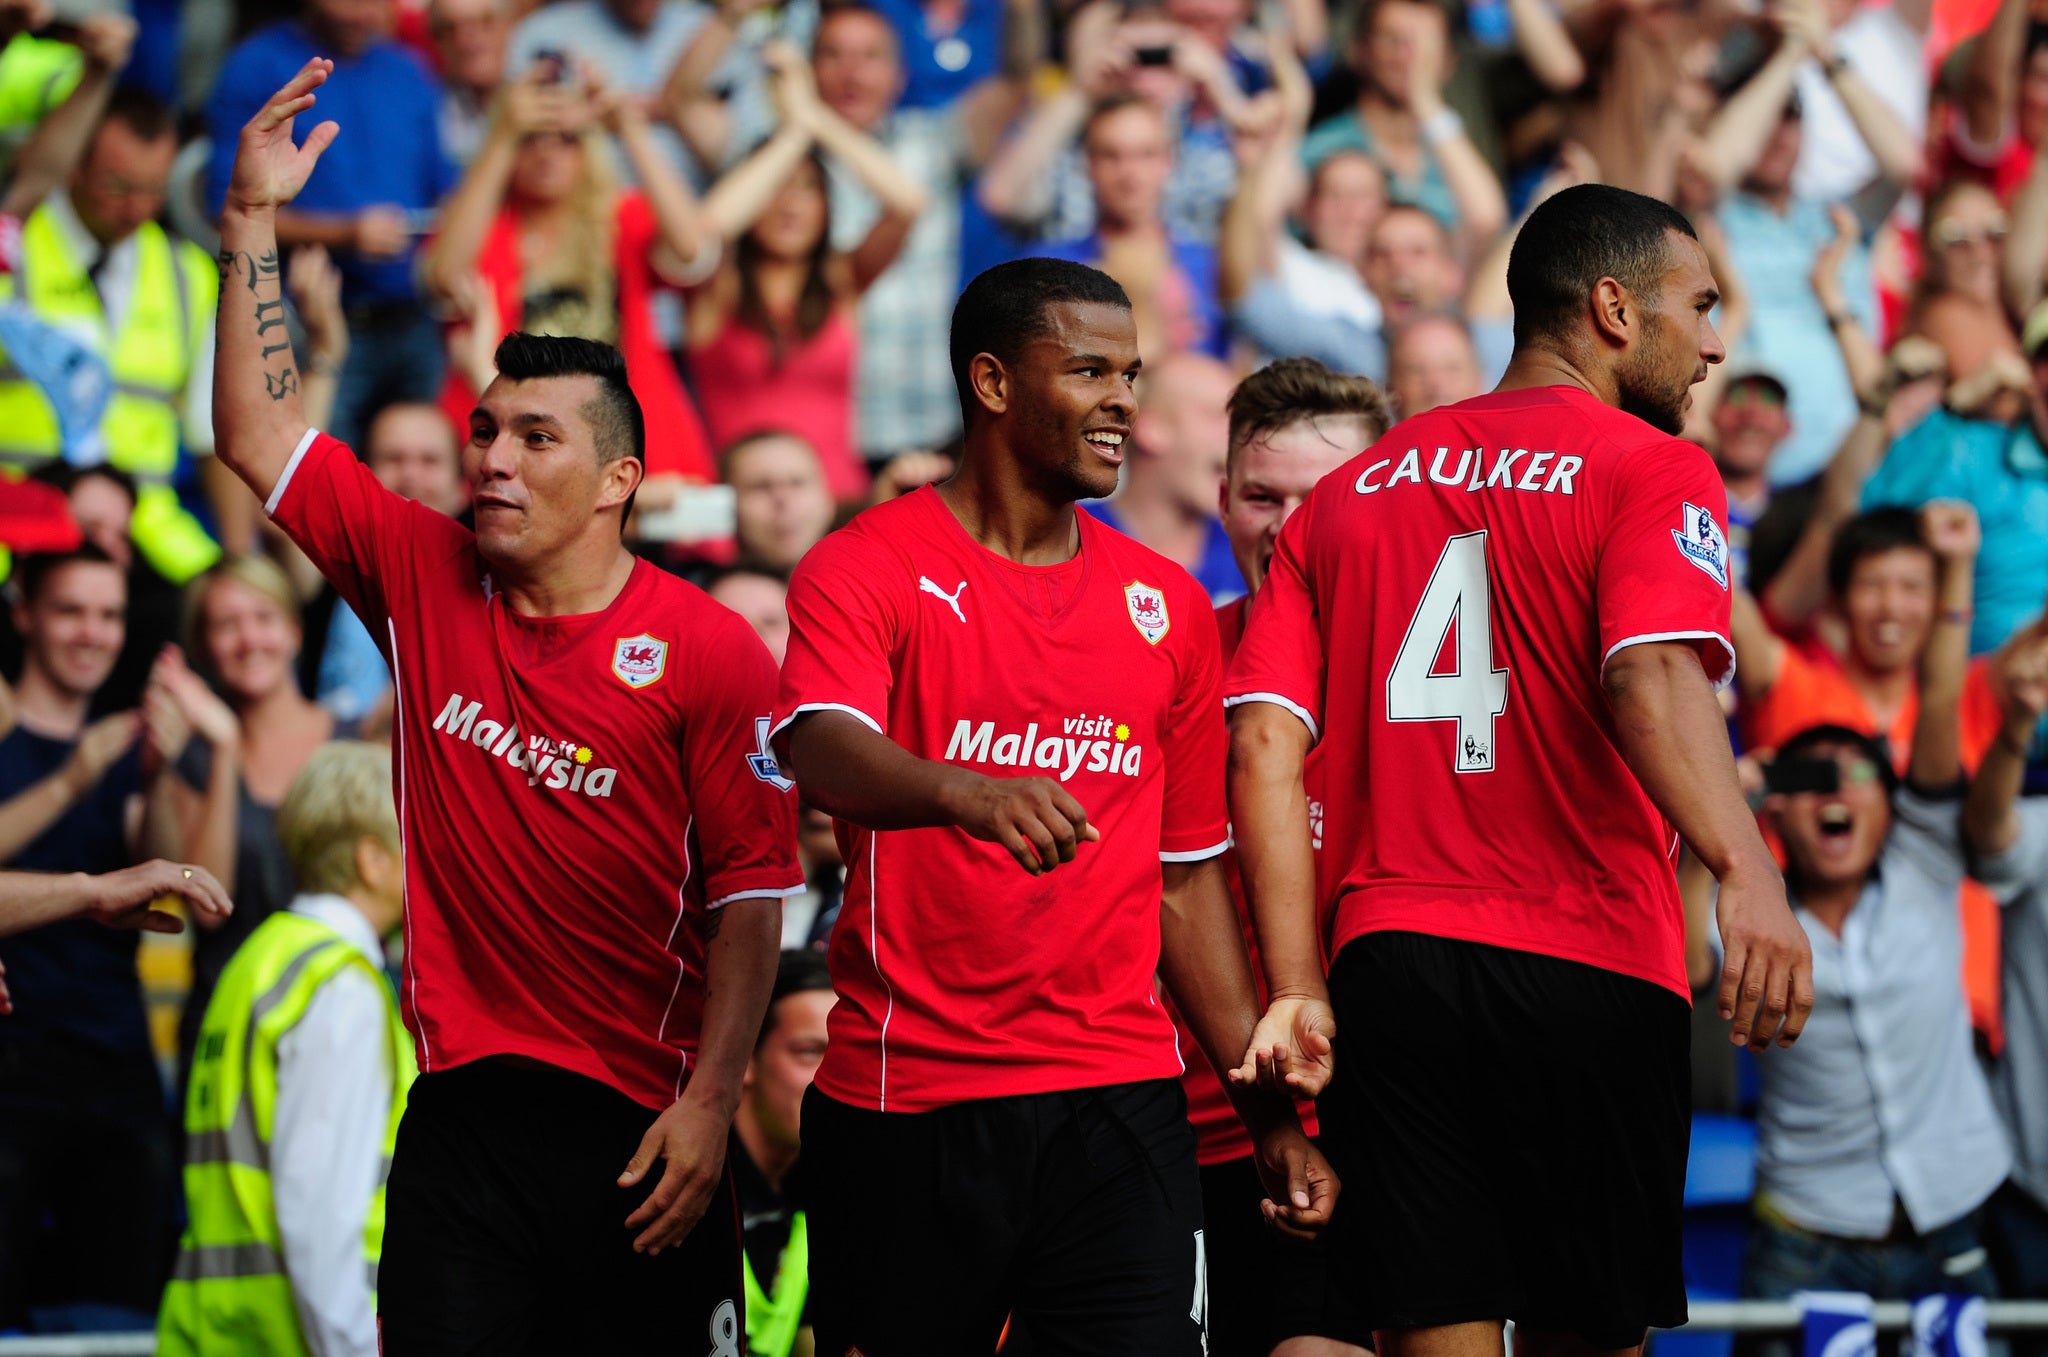 CARDIFF, WALES - AUGUST 25: Cardiff City scorers Fraizer Campbell (c) and team mates lead the celebrations after the third Cardiff goal during the Barclays Premier League match between Cardiff City and Manchester City at Cardiff City Stadium.